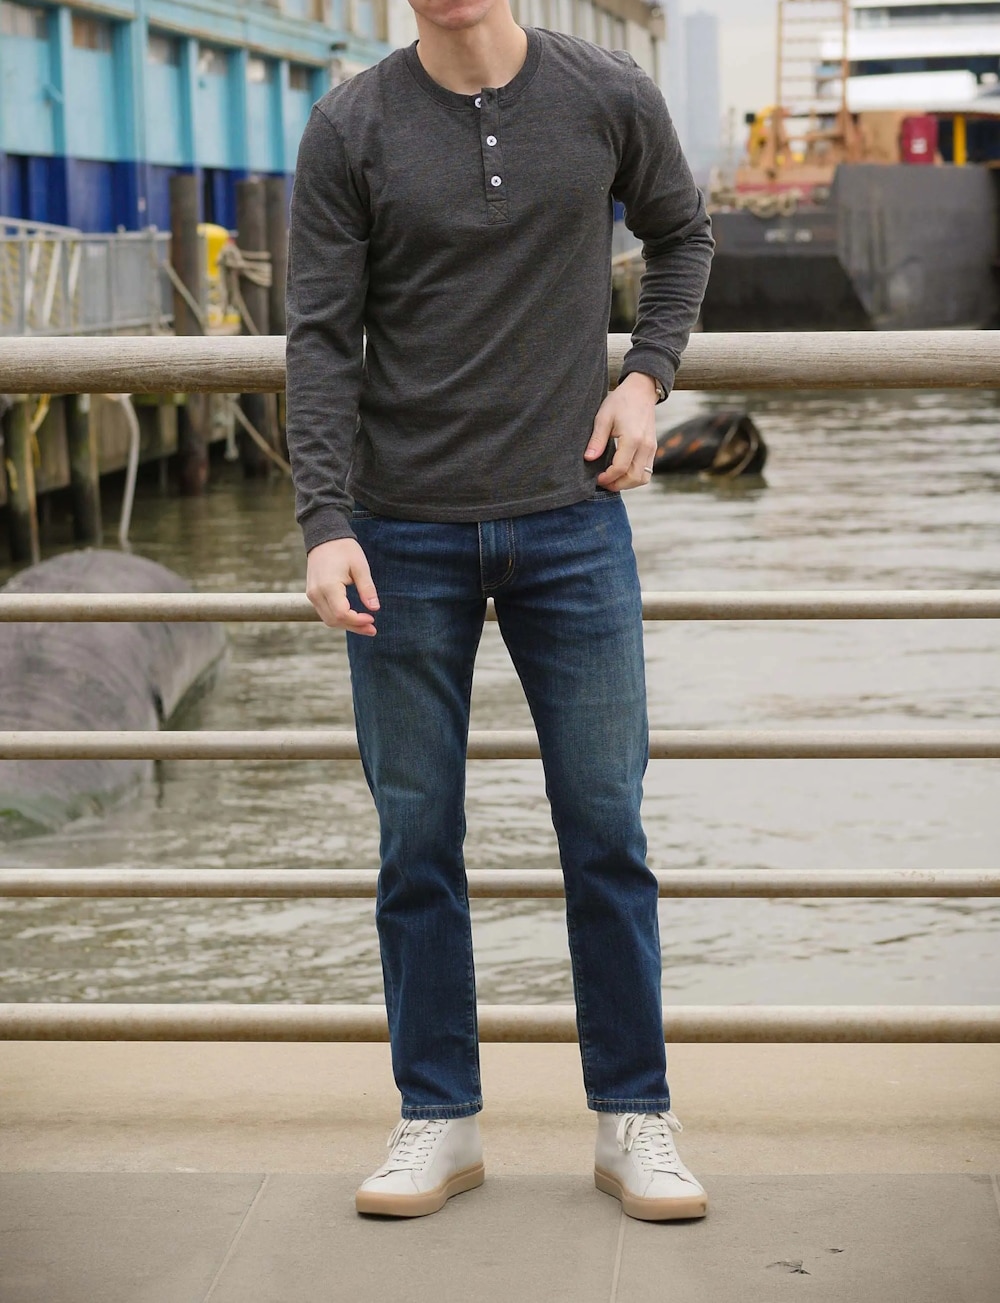 Henley Shirt and Jeans Outfit 1